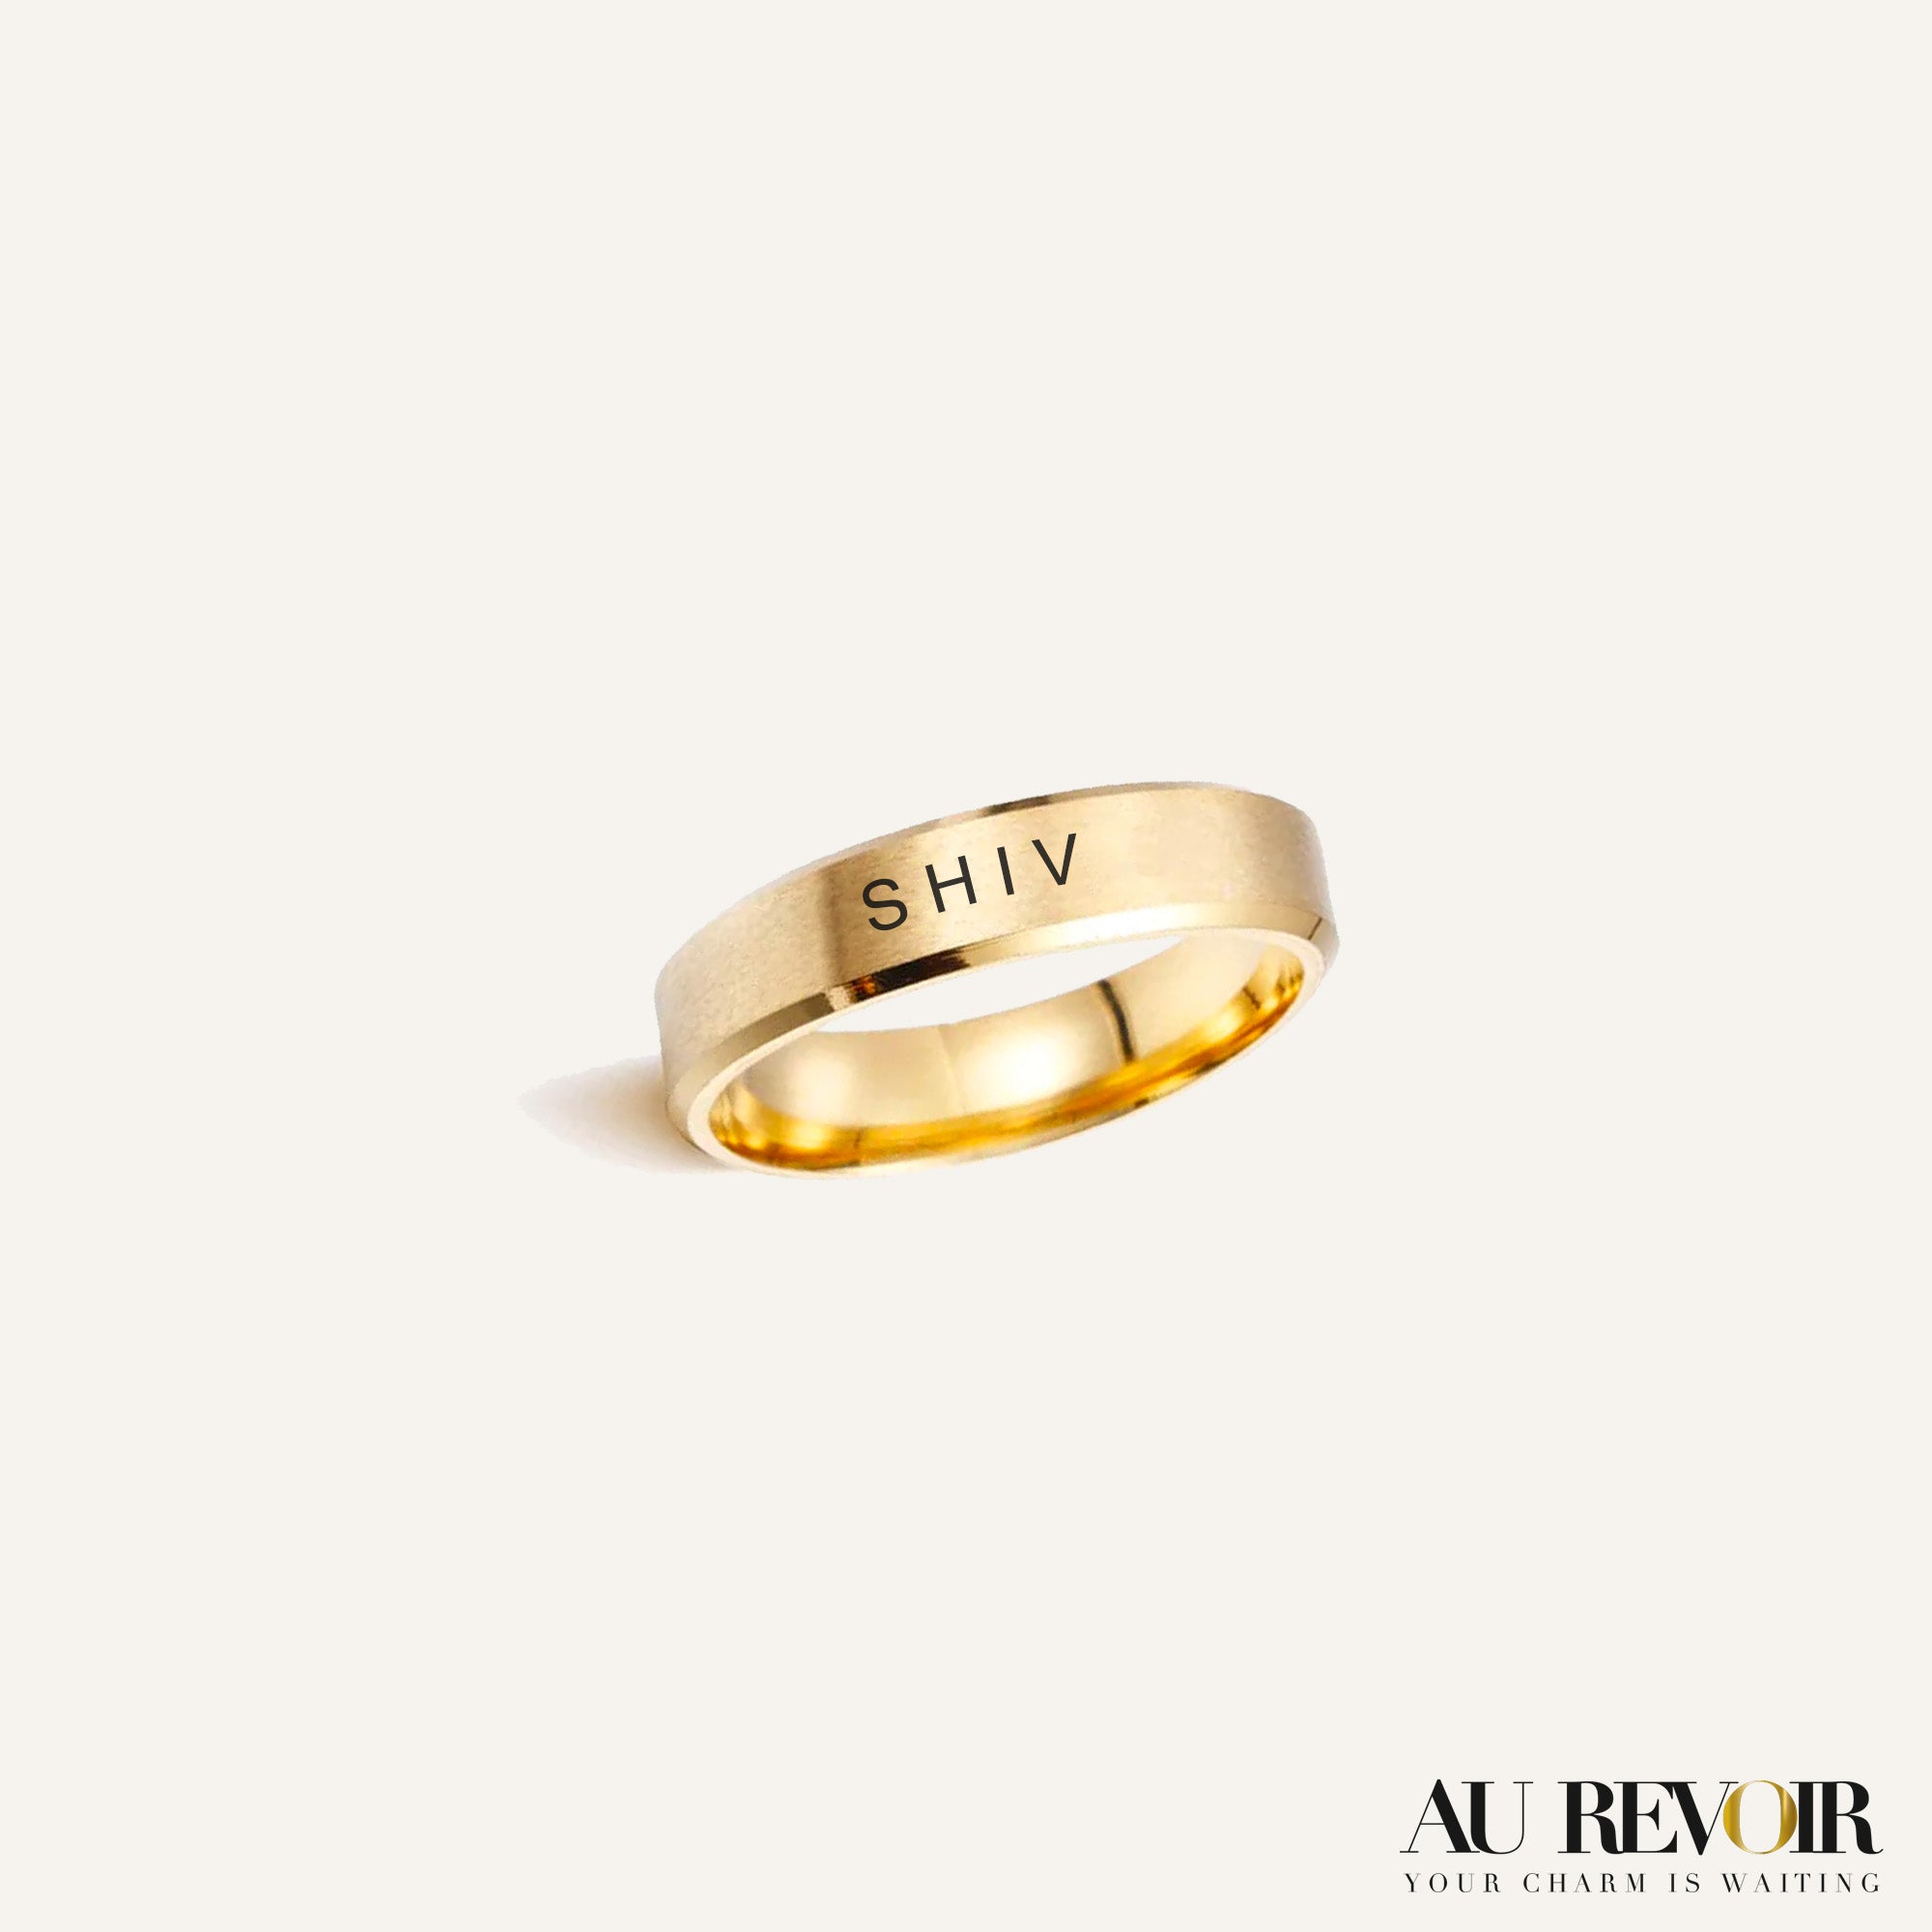 Double Name Ring Two Name Ring in Sterling Silver, Gold and Rose Gold  Personalized Gift for Mom Best Friend Gift RM75F68 - Etsy | Name rings, Gold  ring designs, Personalized gifts for mom